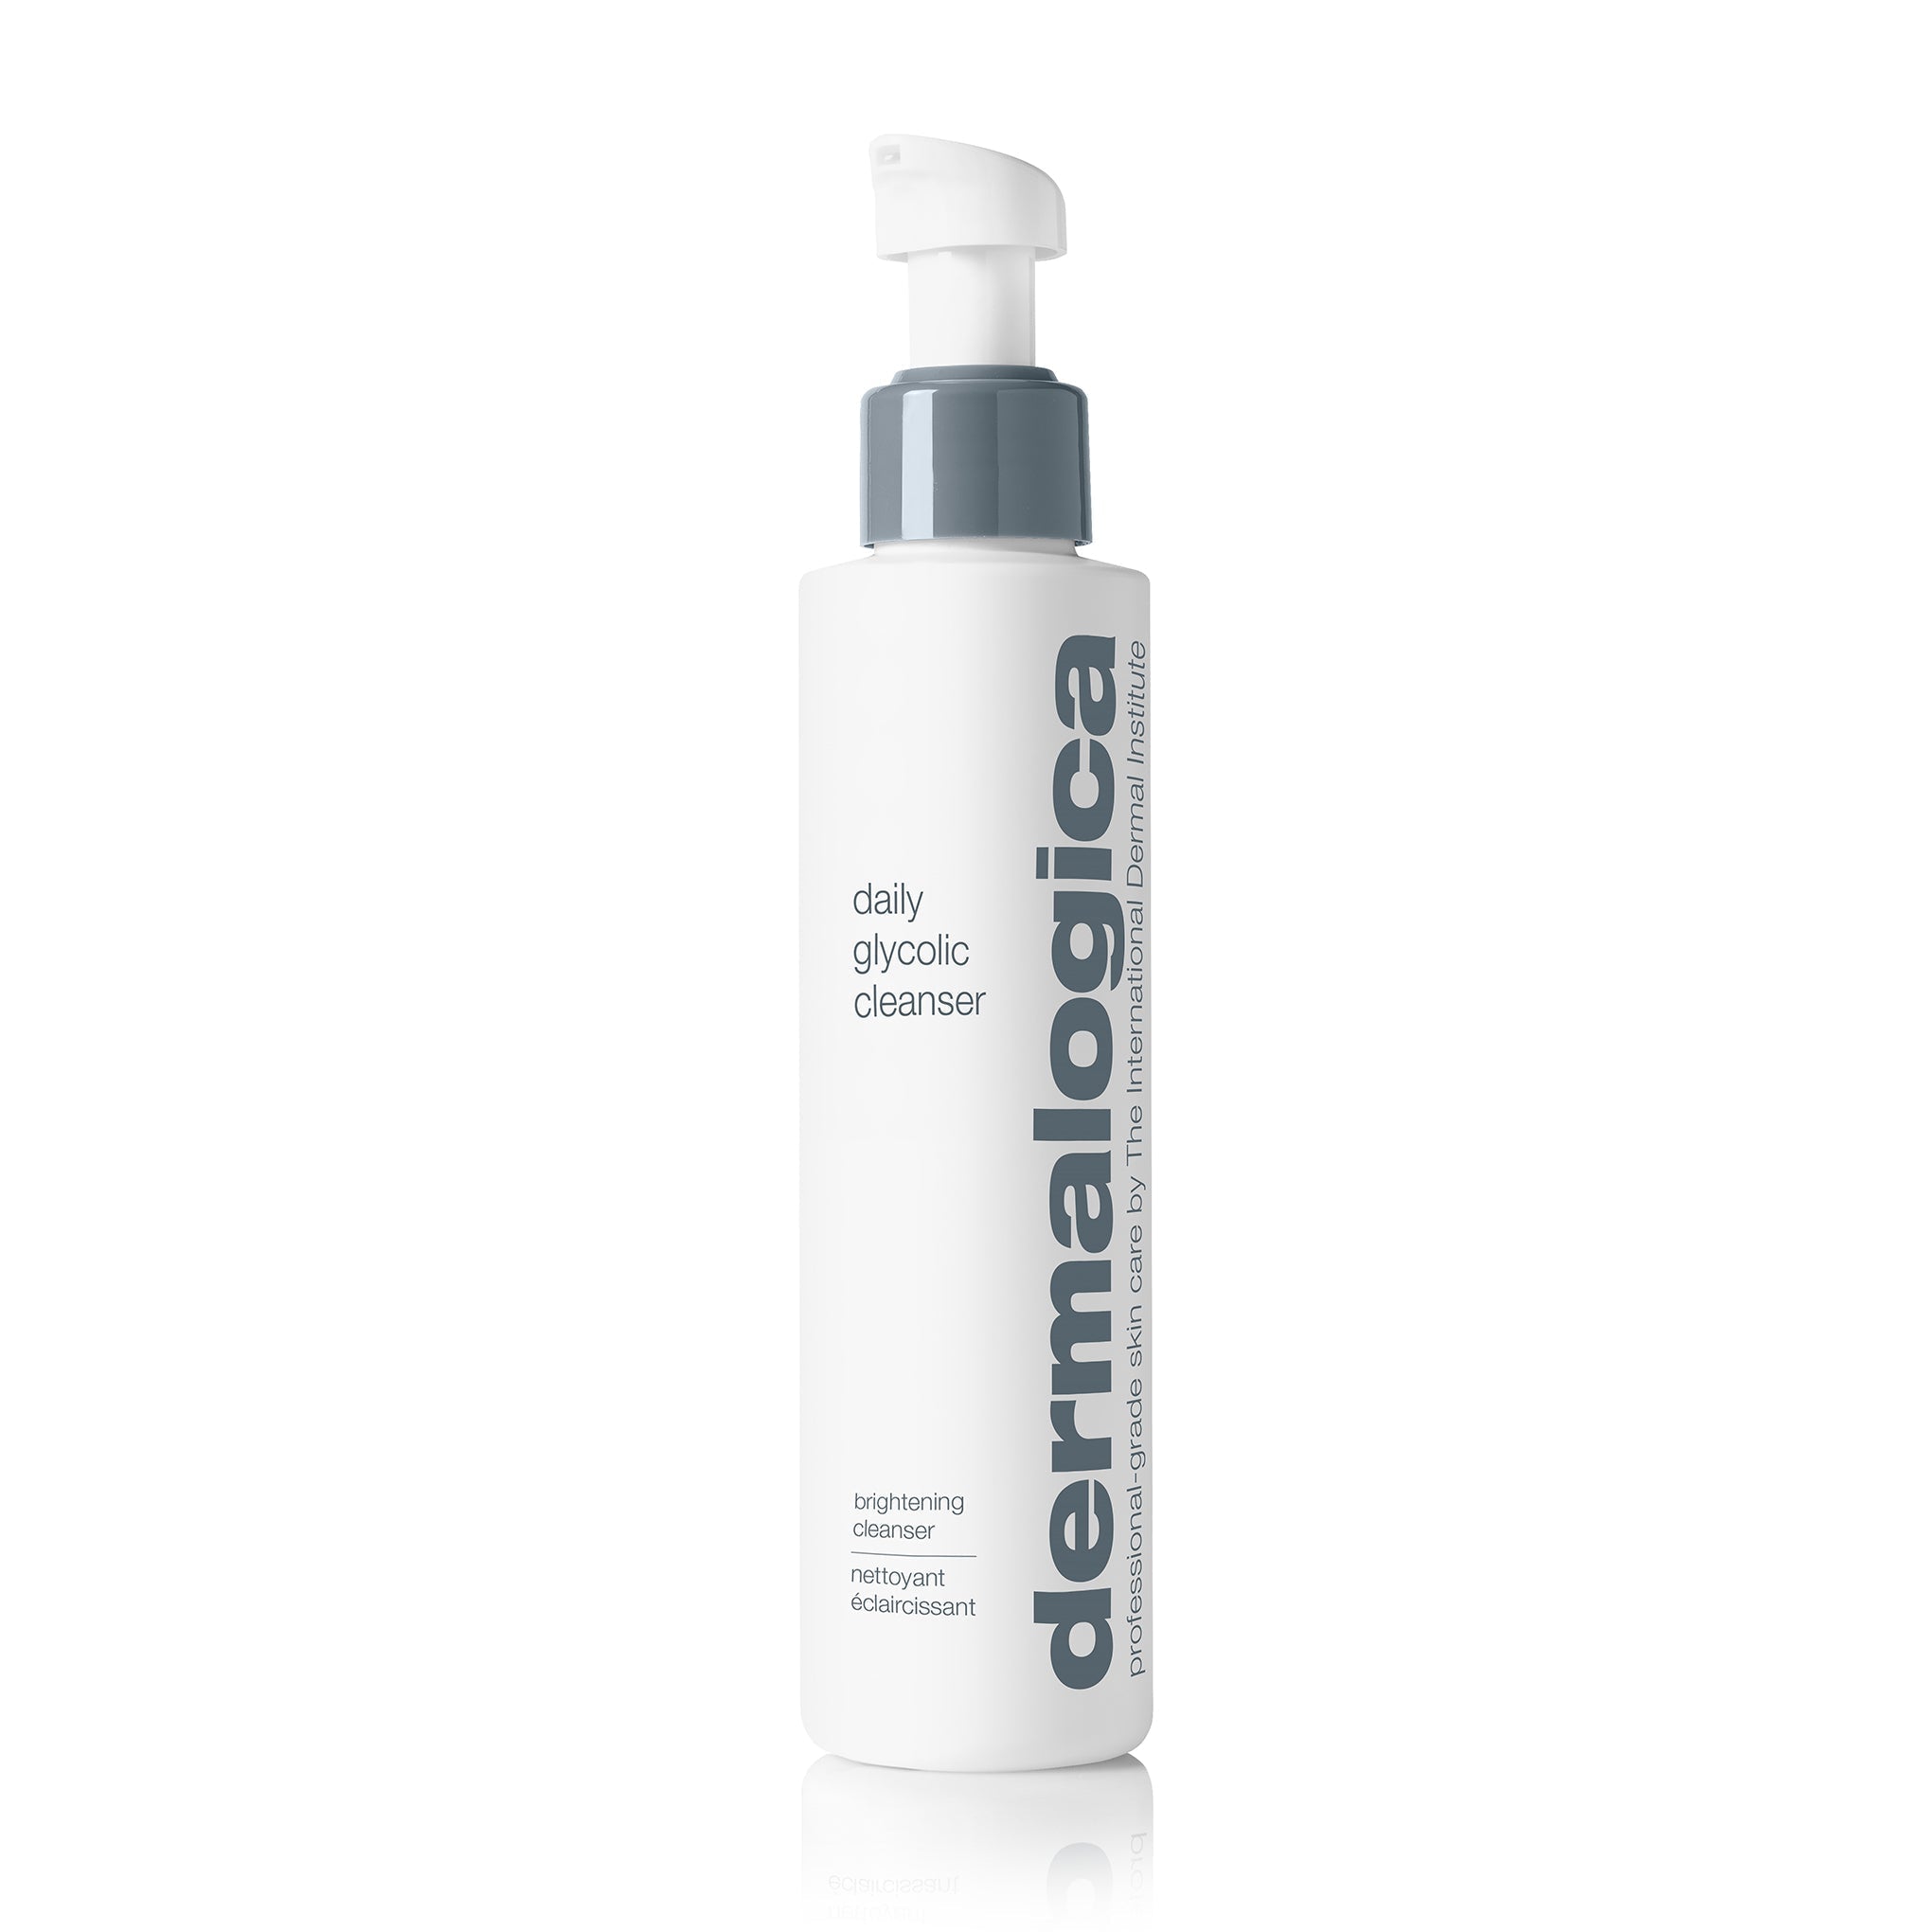 Dermalogica Daily Glycolic Cleanser - Exquisite Laser Clinic